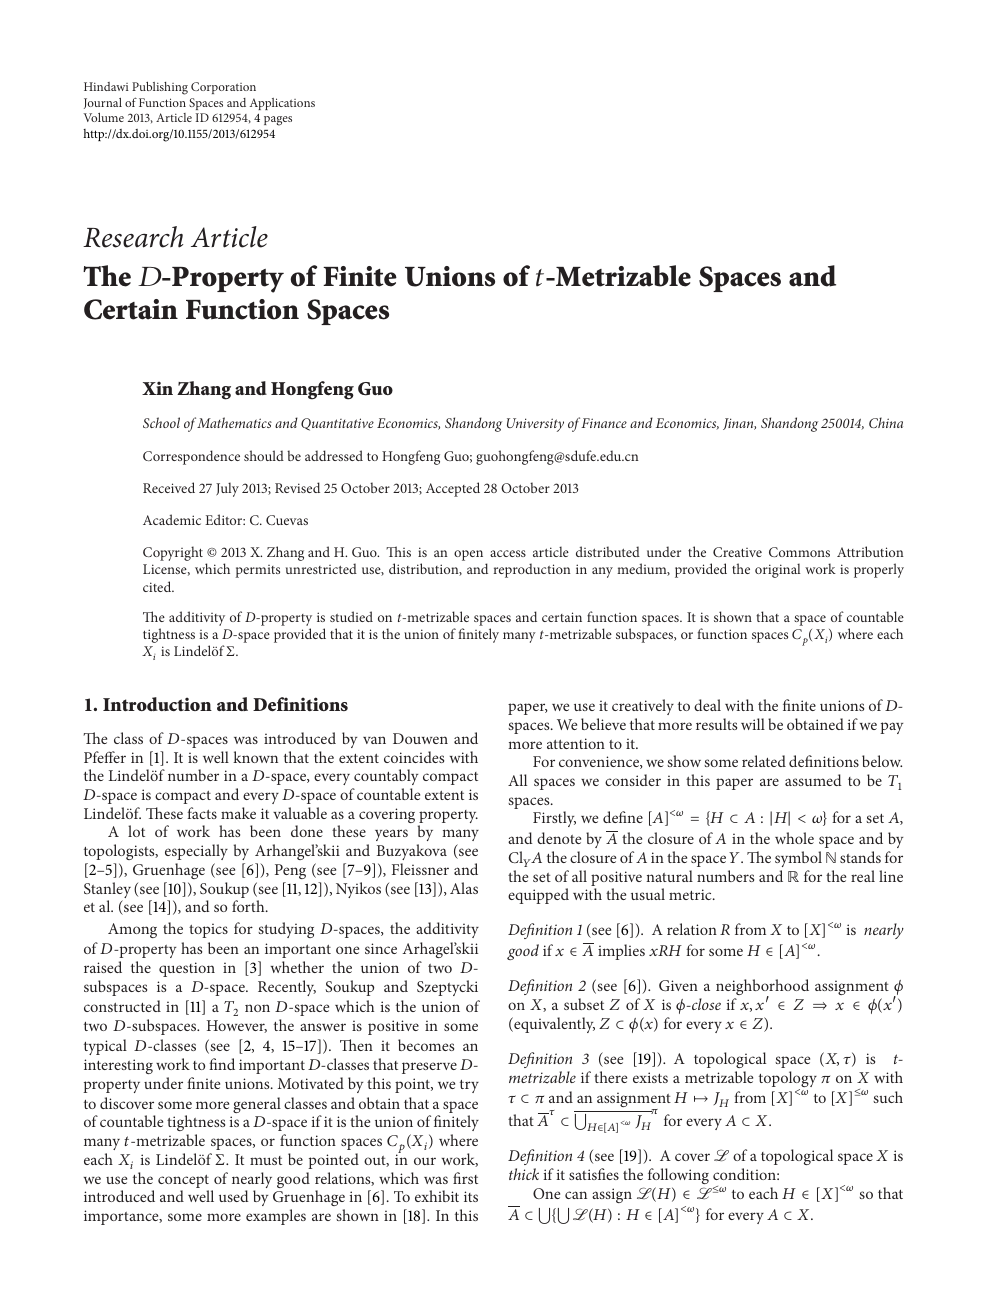 The Property Of Finite Unions Of Metrizable Spaces And Certain Function Spaces Topic Of Research Paper In Mathematics Download Scholarly Article Pdf And Read For Free On Cyberleninka Open Science Hub